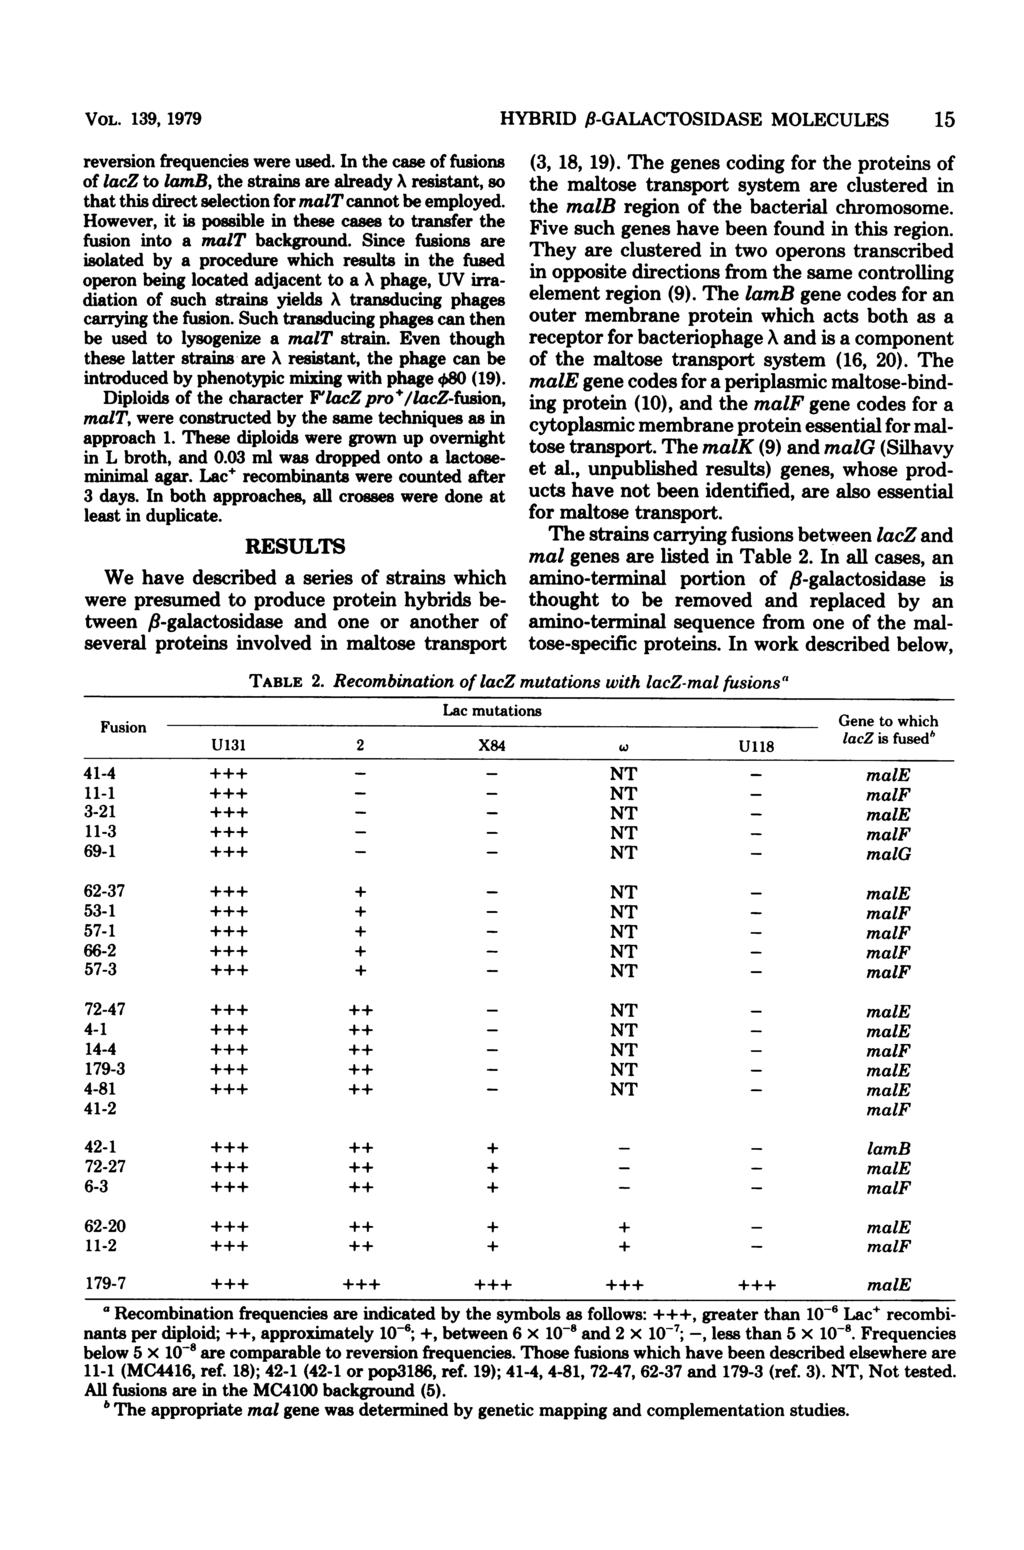 VOL. 139, 1979 reversion frequencies were used. In the case of fusions of lacz to lamb, the strains are already A resistant, so that this direct selection for malt cannot be employed.